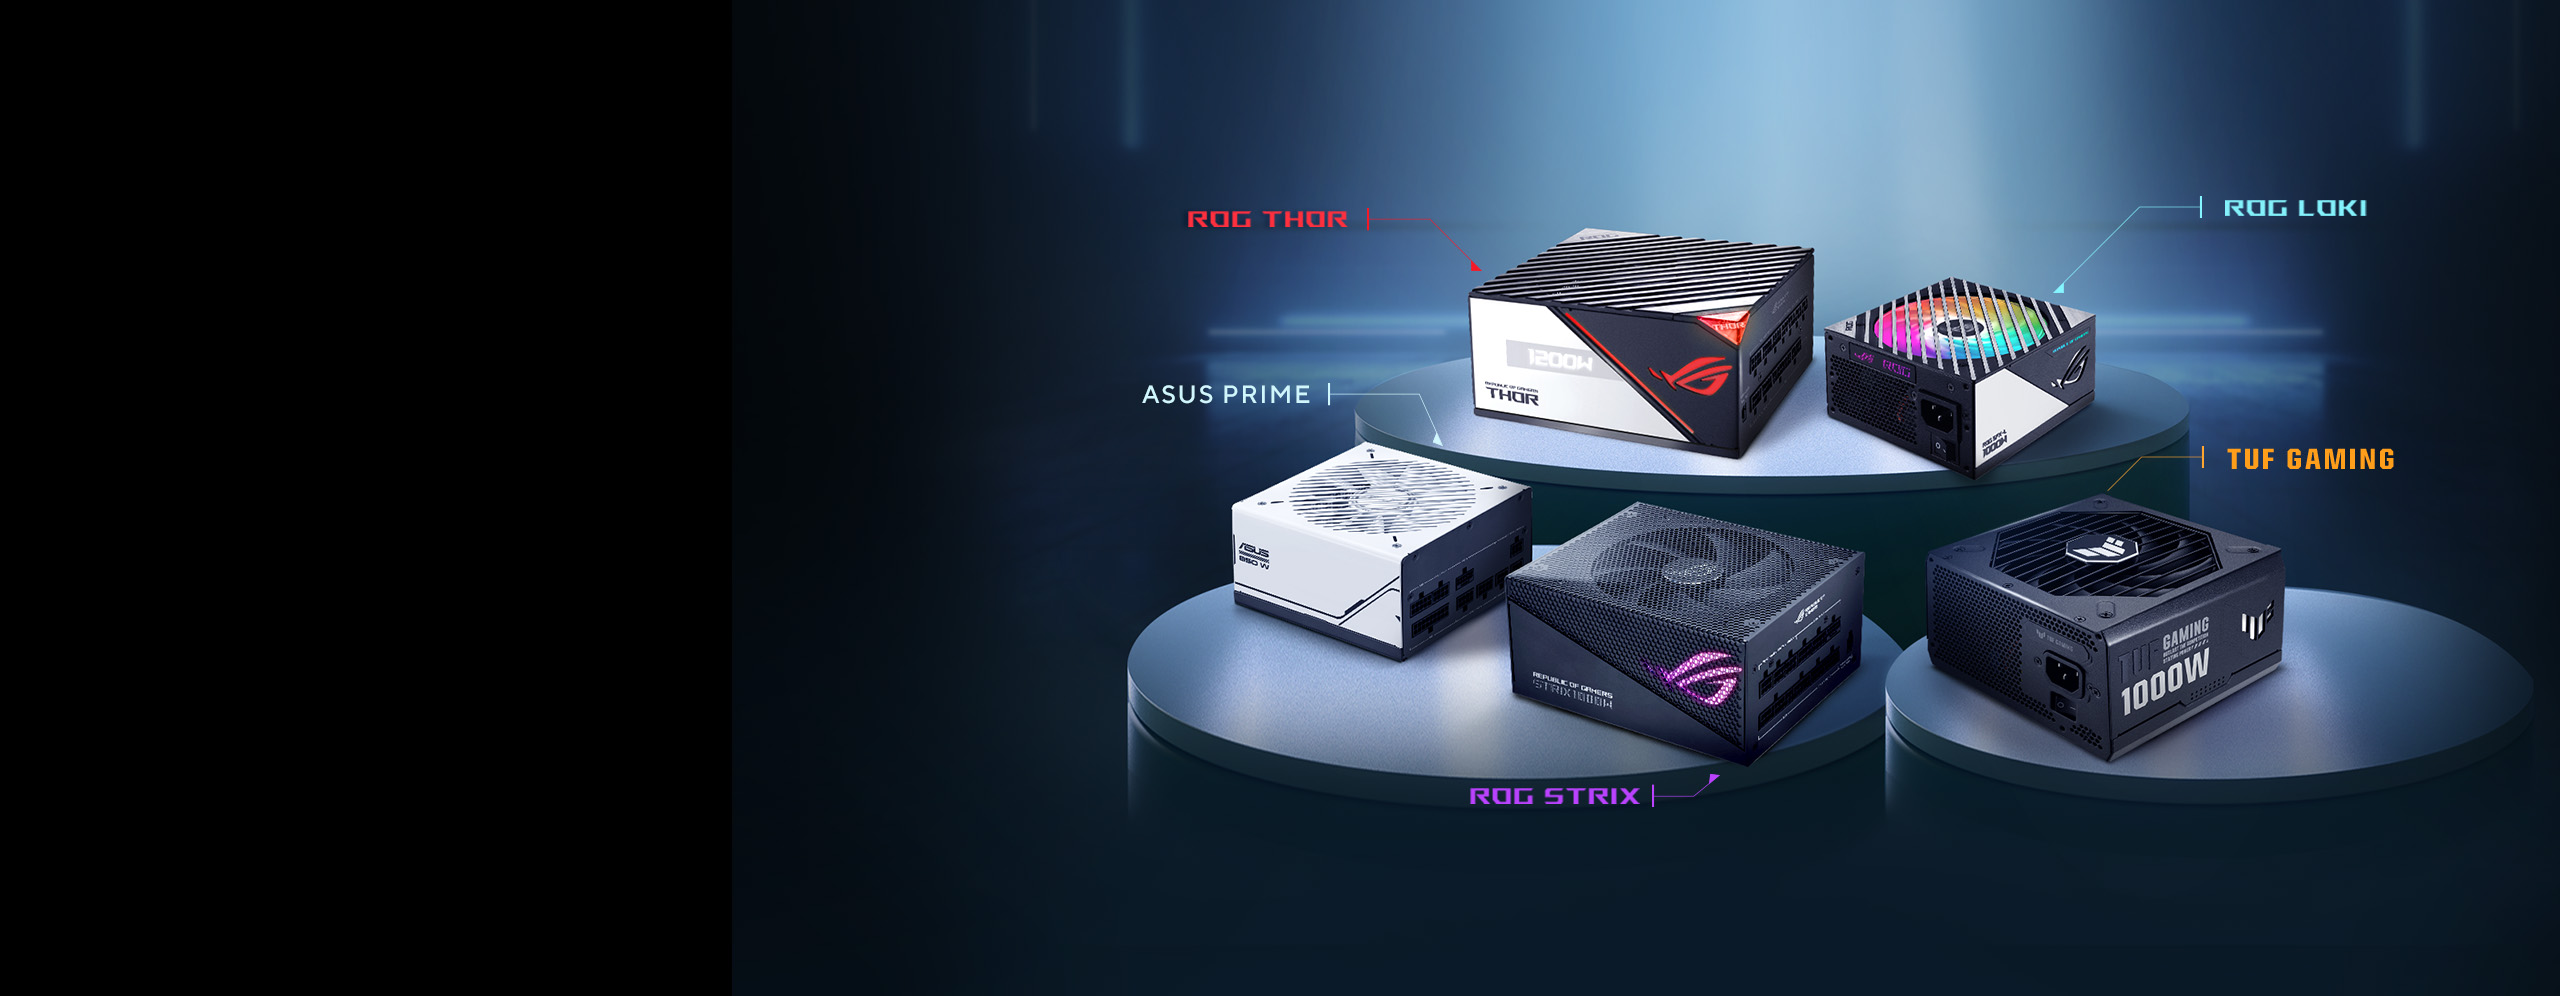 Recommended power supplies for the ROG RTX™ 40 series graphics card